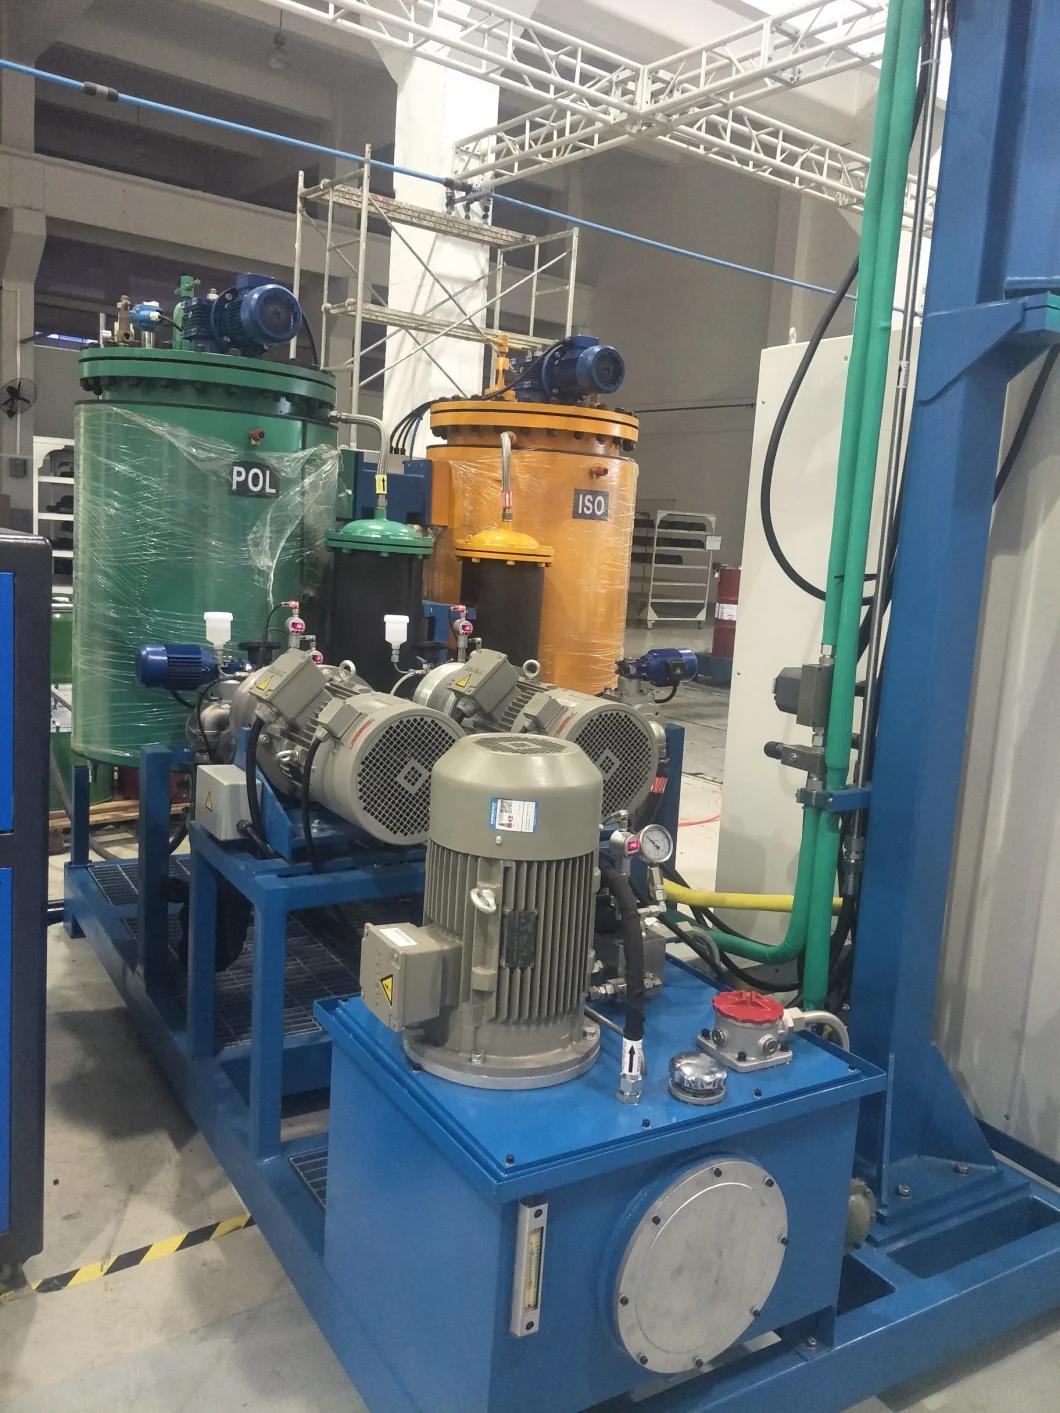 PU Machine with 12 Pump for Take-out Insulation Box Production Line